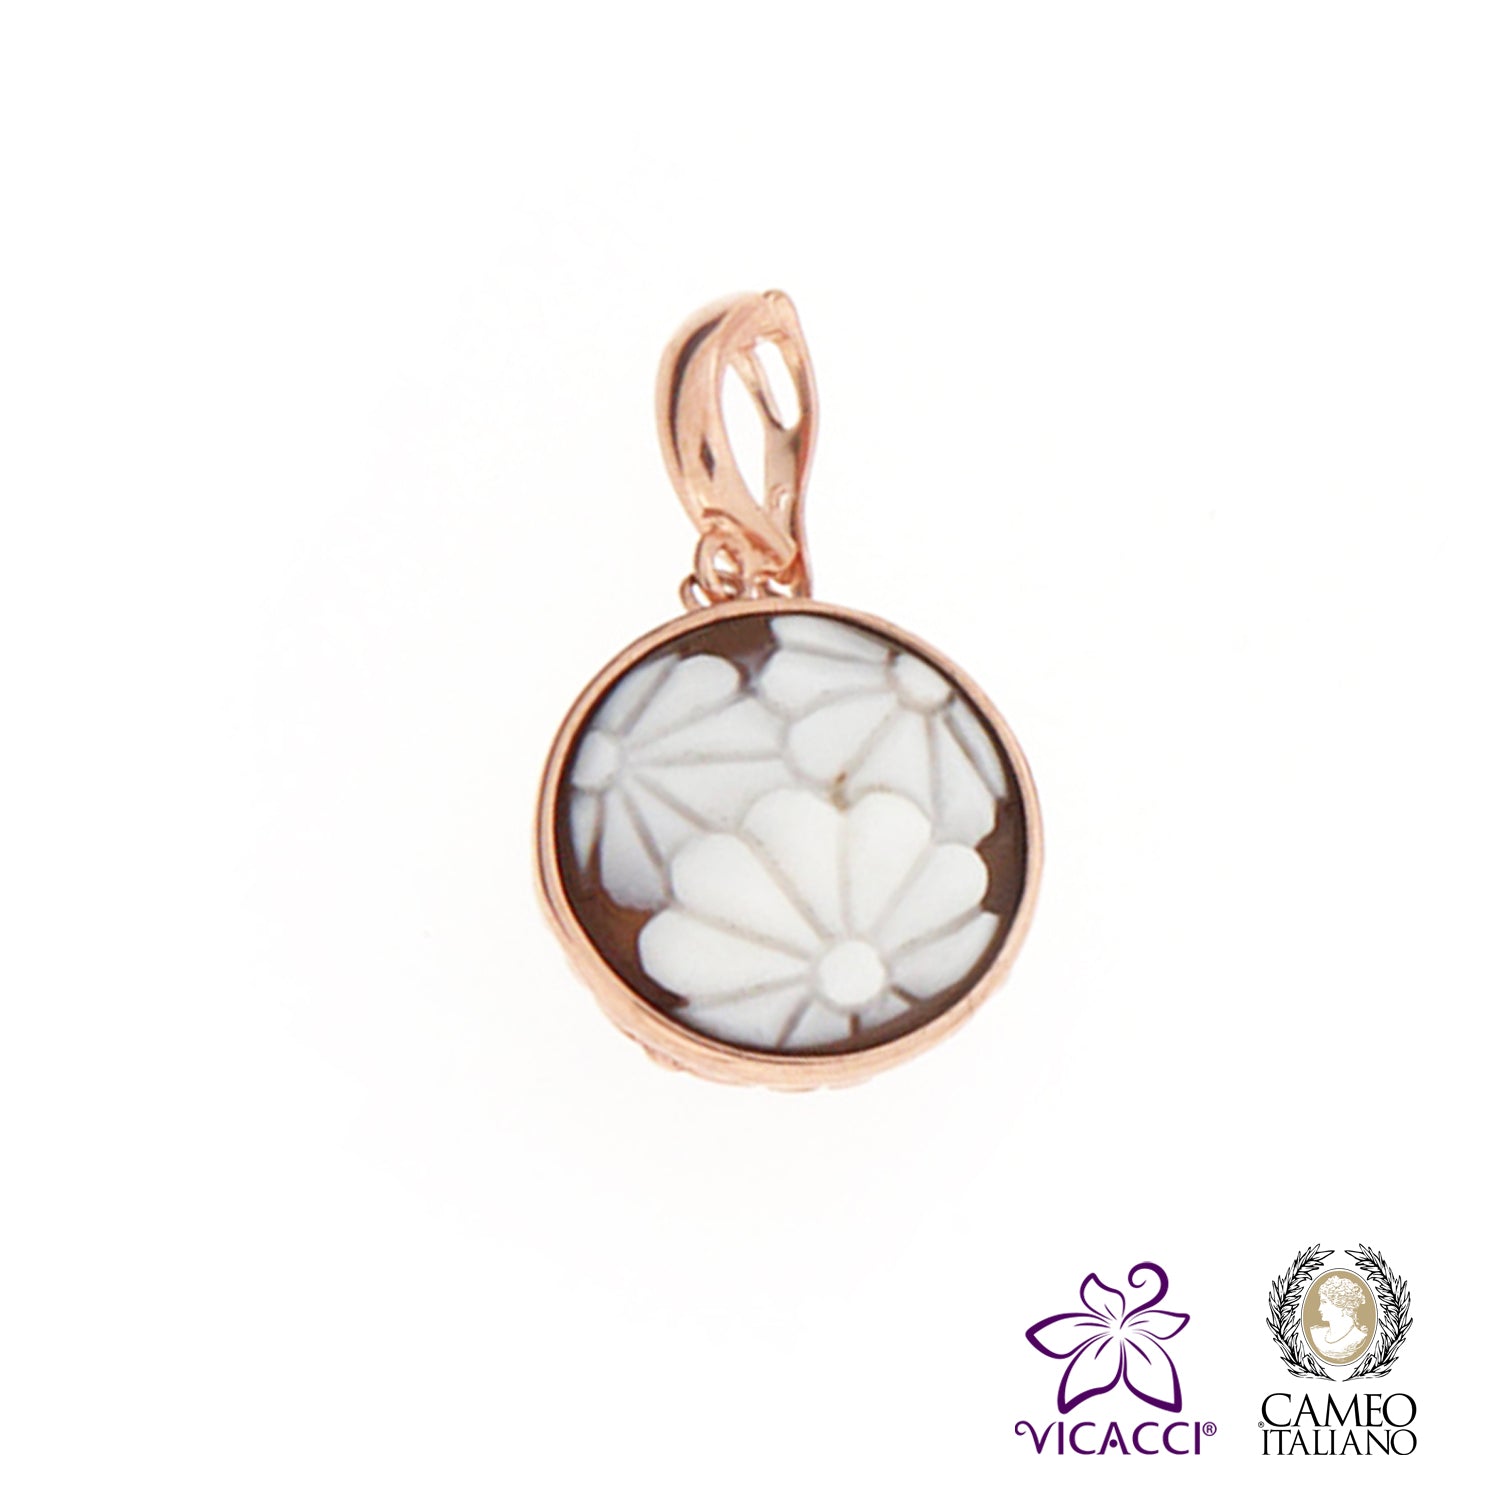 Cameo Italiano, P202 Pendant, 925 Sterling Silver Rose Gold Plated